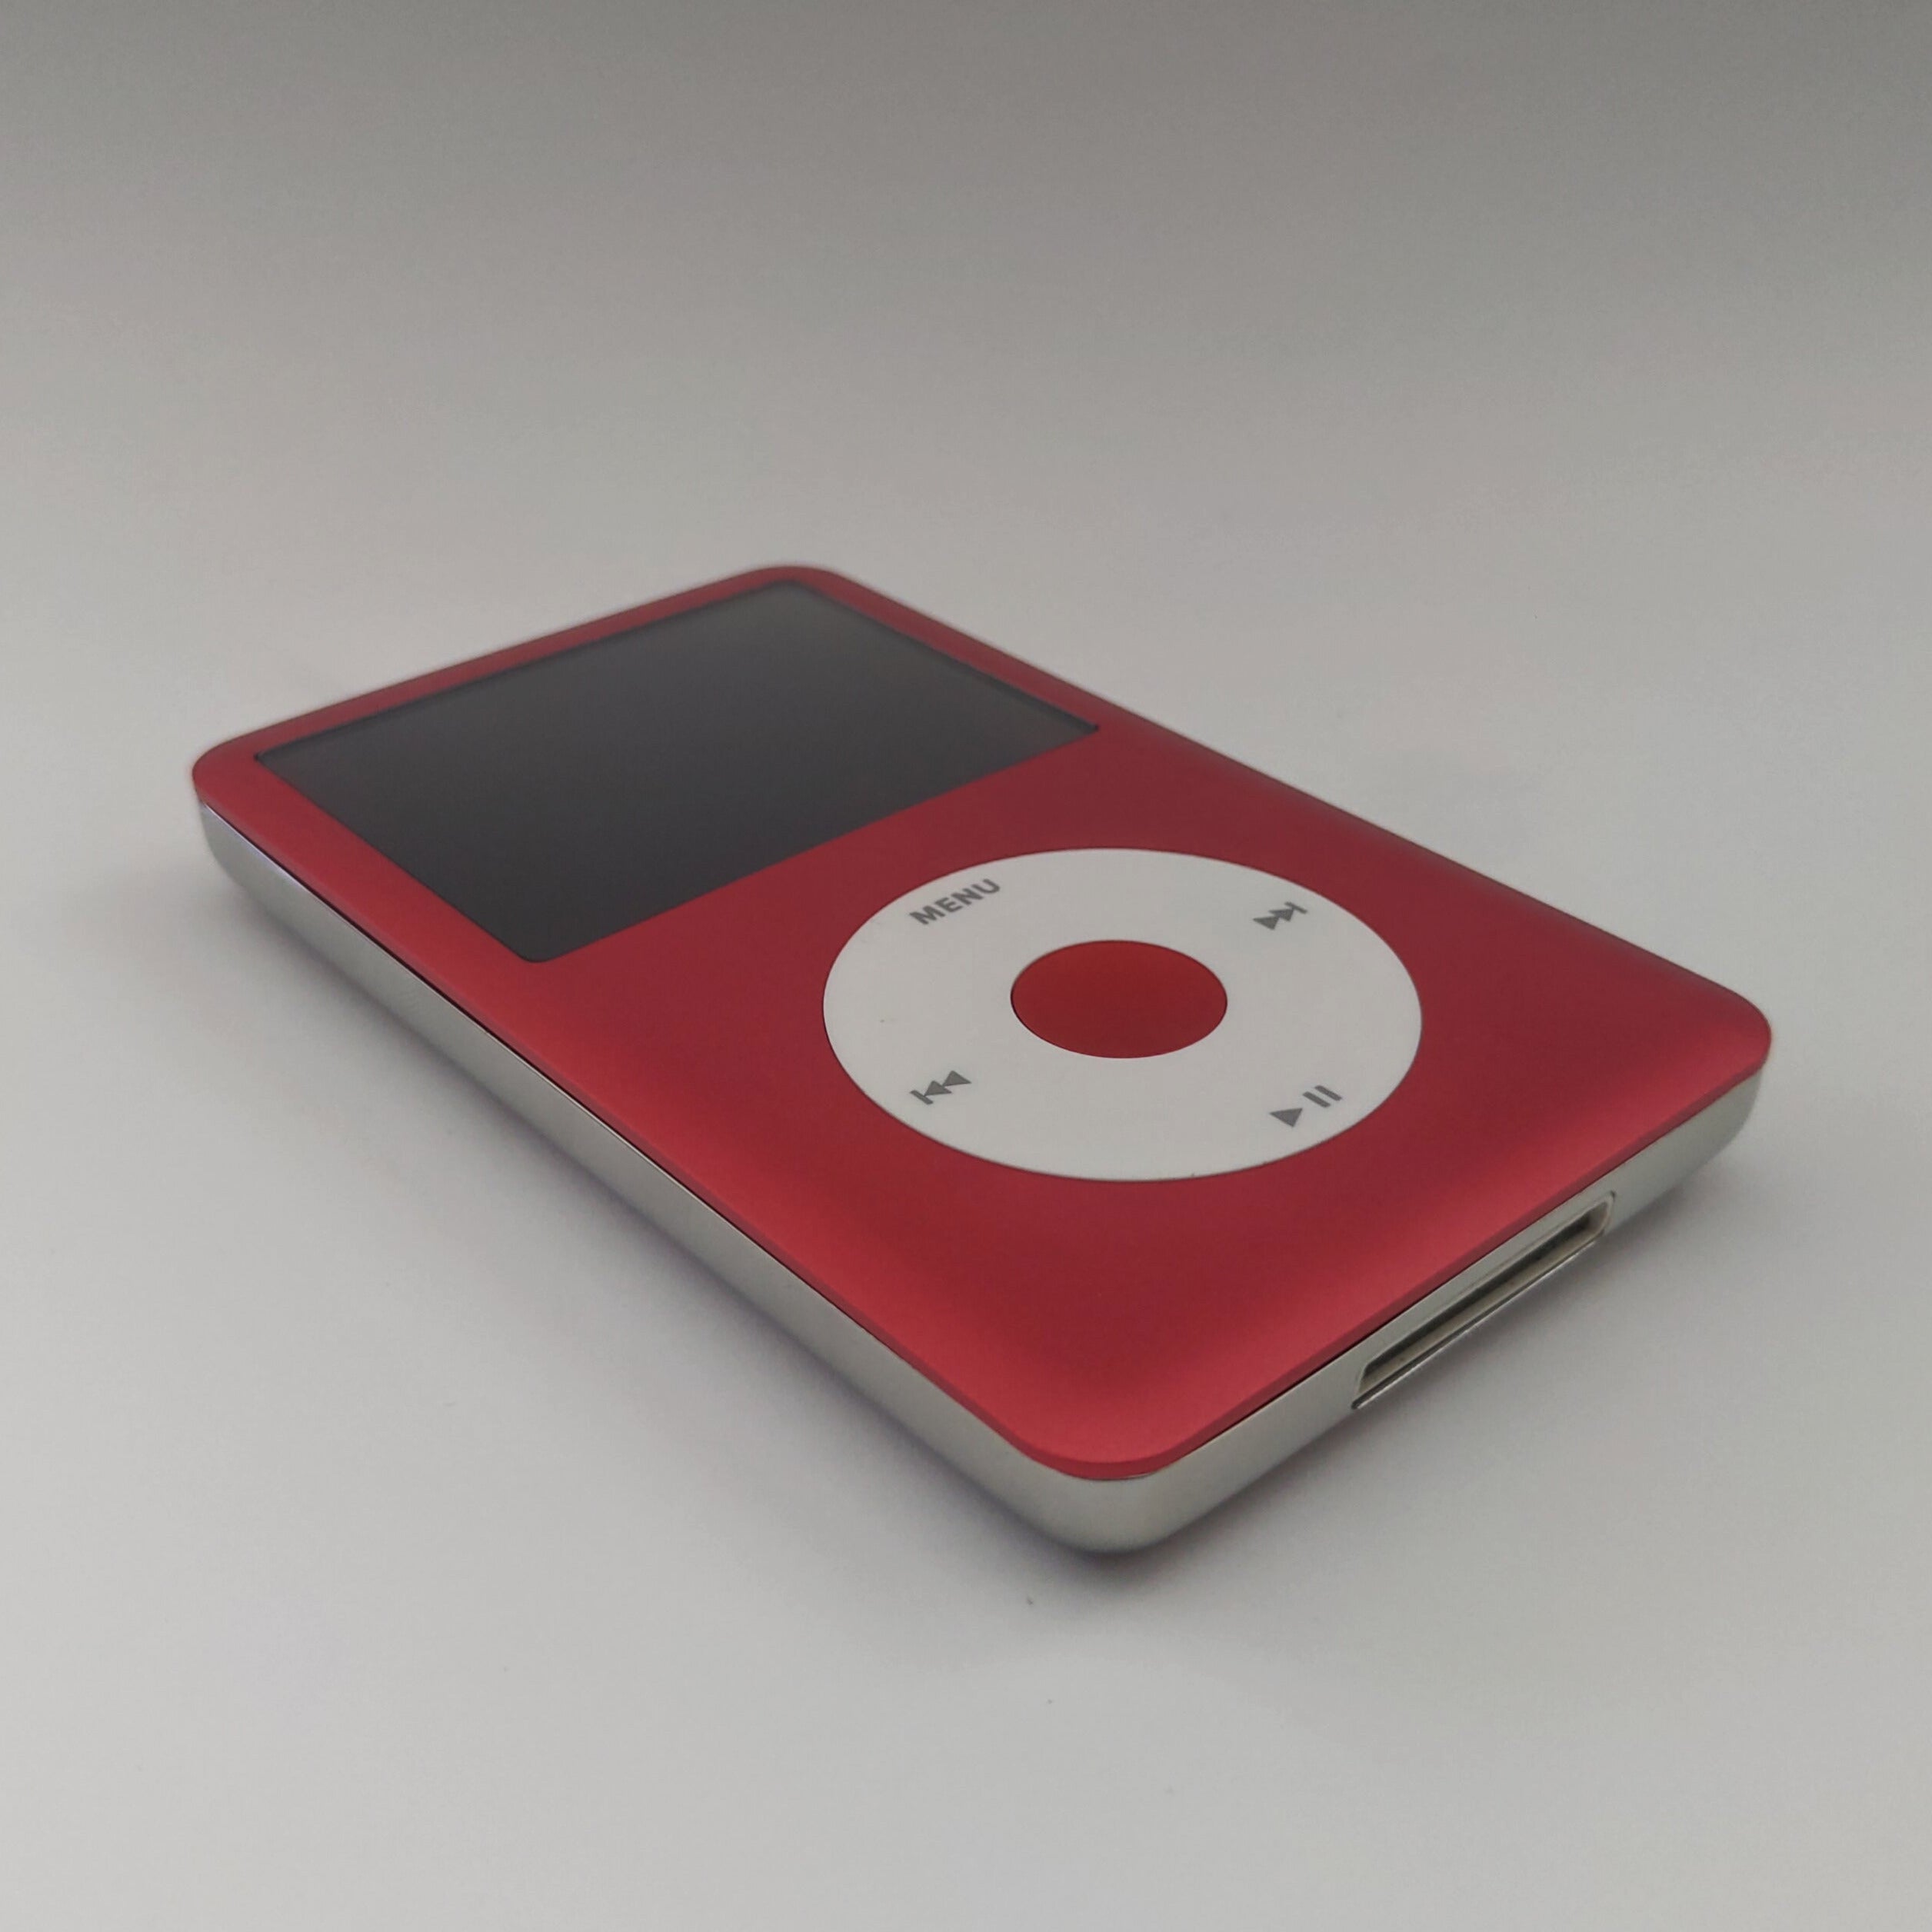 iPod classic - Red and White | Flash Storage and Extended Battery